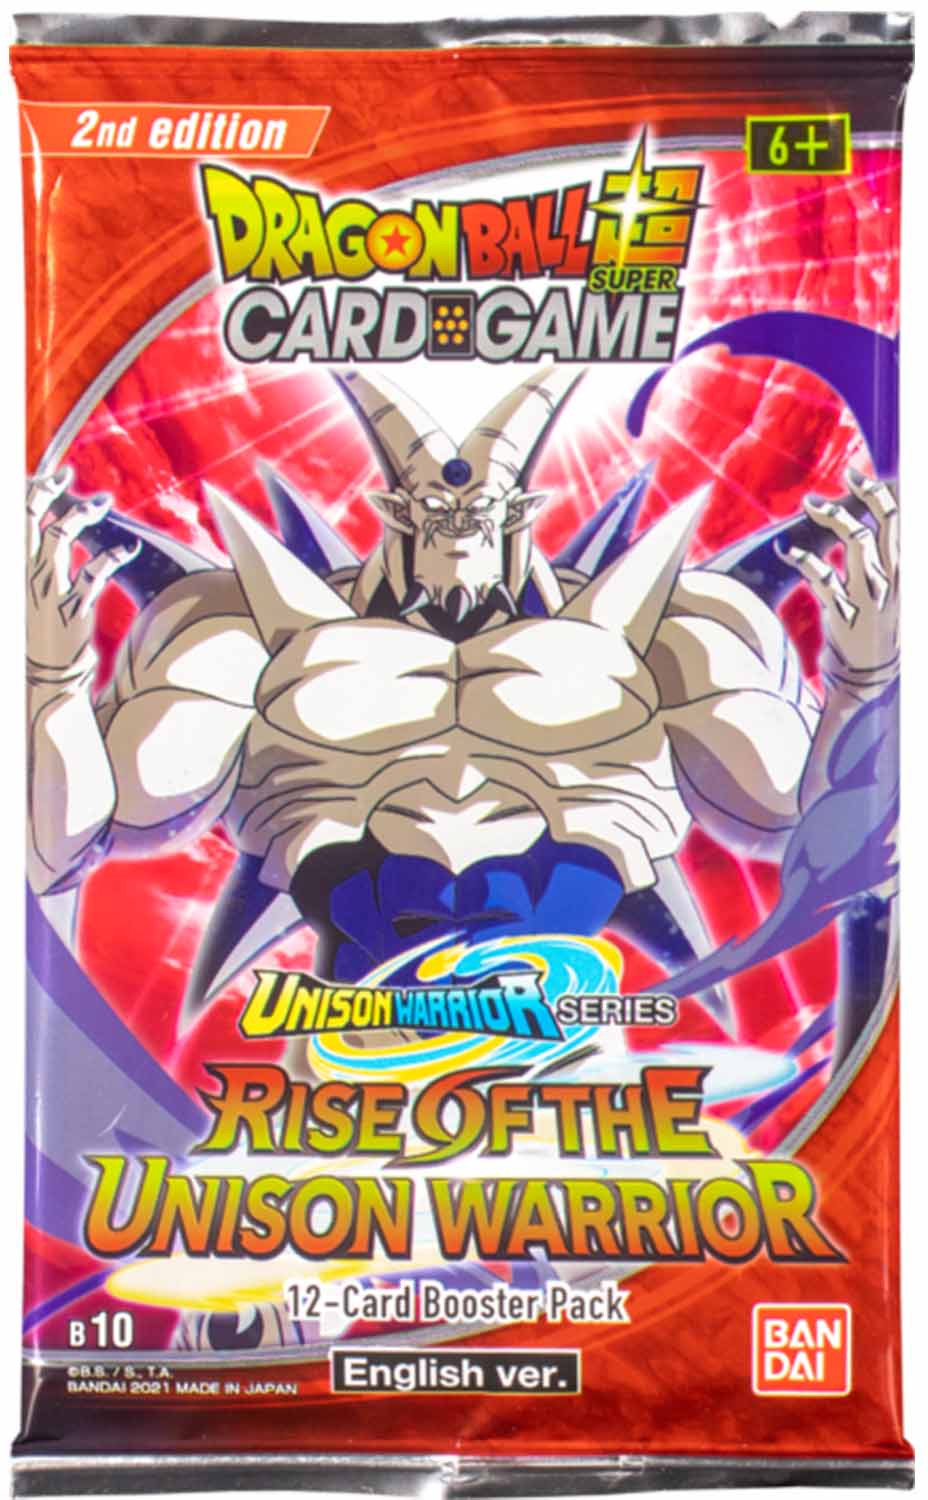 Rise of the Unison Warrior B10 Booster Display - Dragon Ball Super Card Game - EN